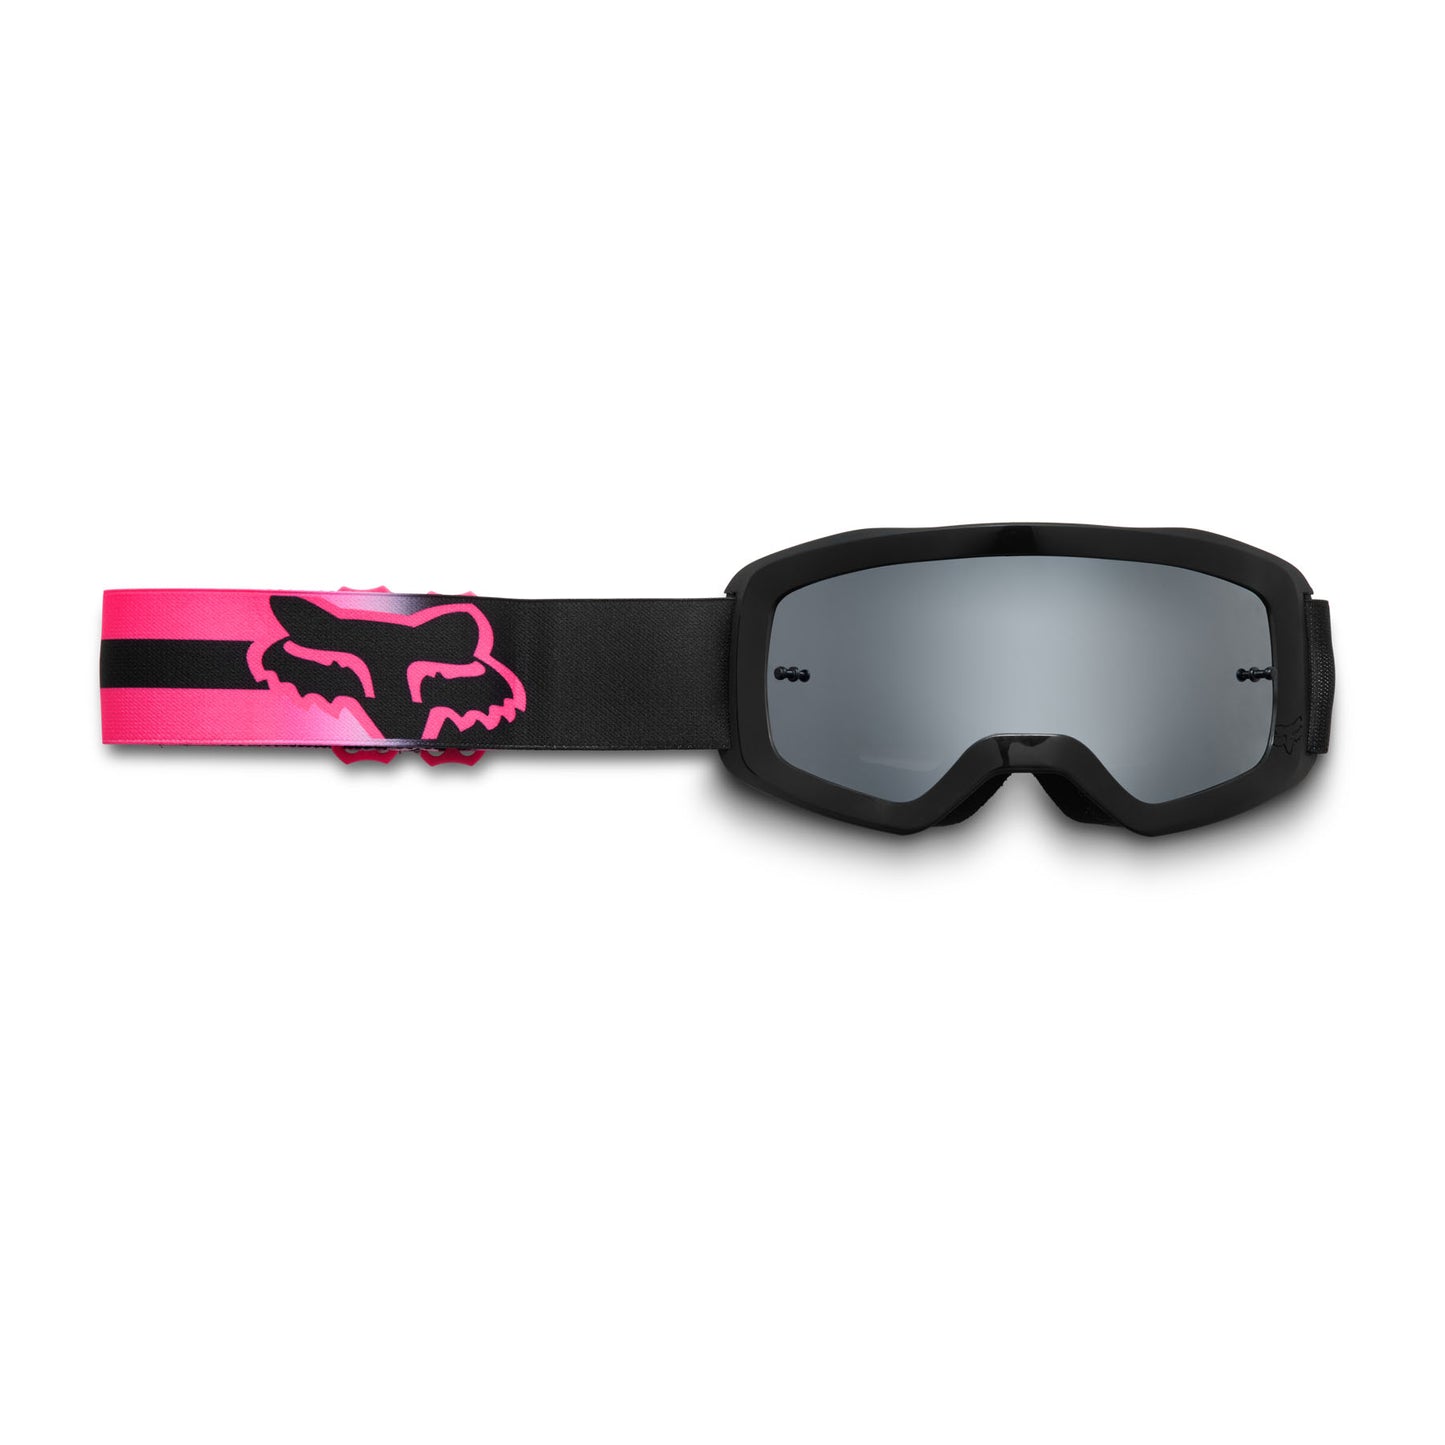 Fox Main Leed Youth Goggles - Youth - One Size Fits Most - Pink - Grey Mirror Lens